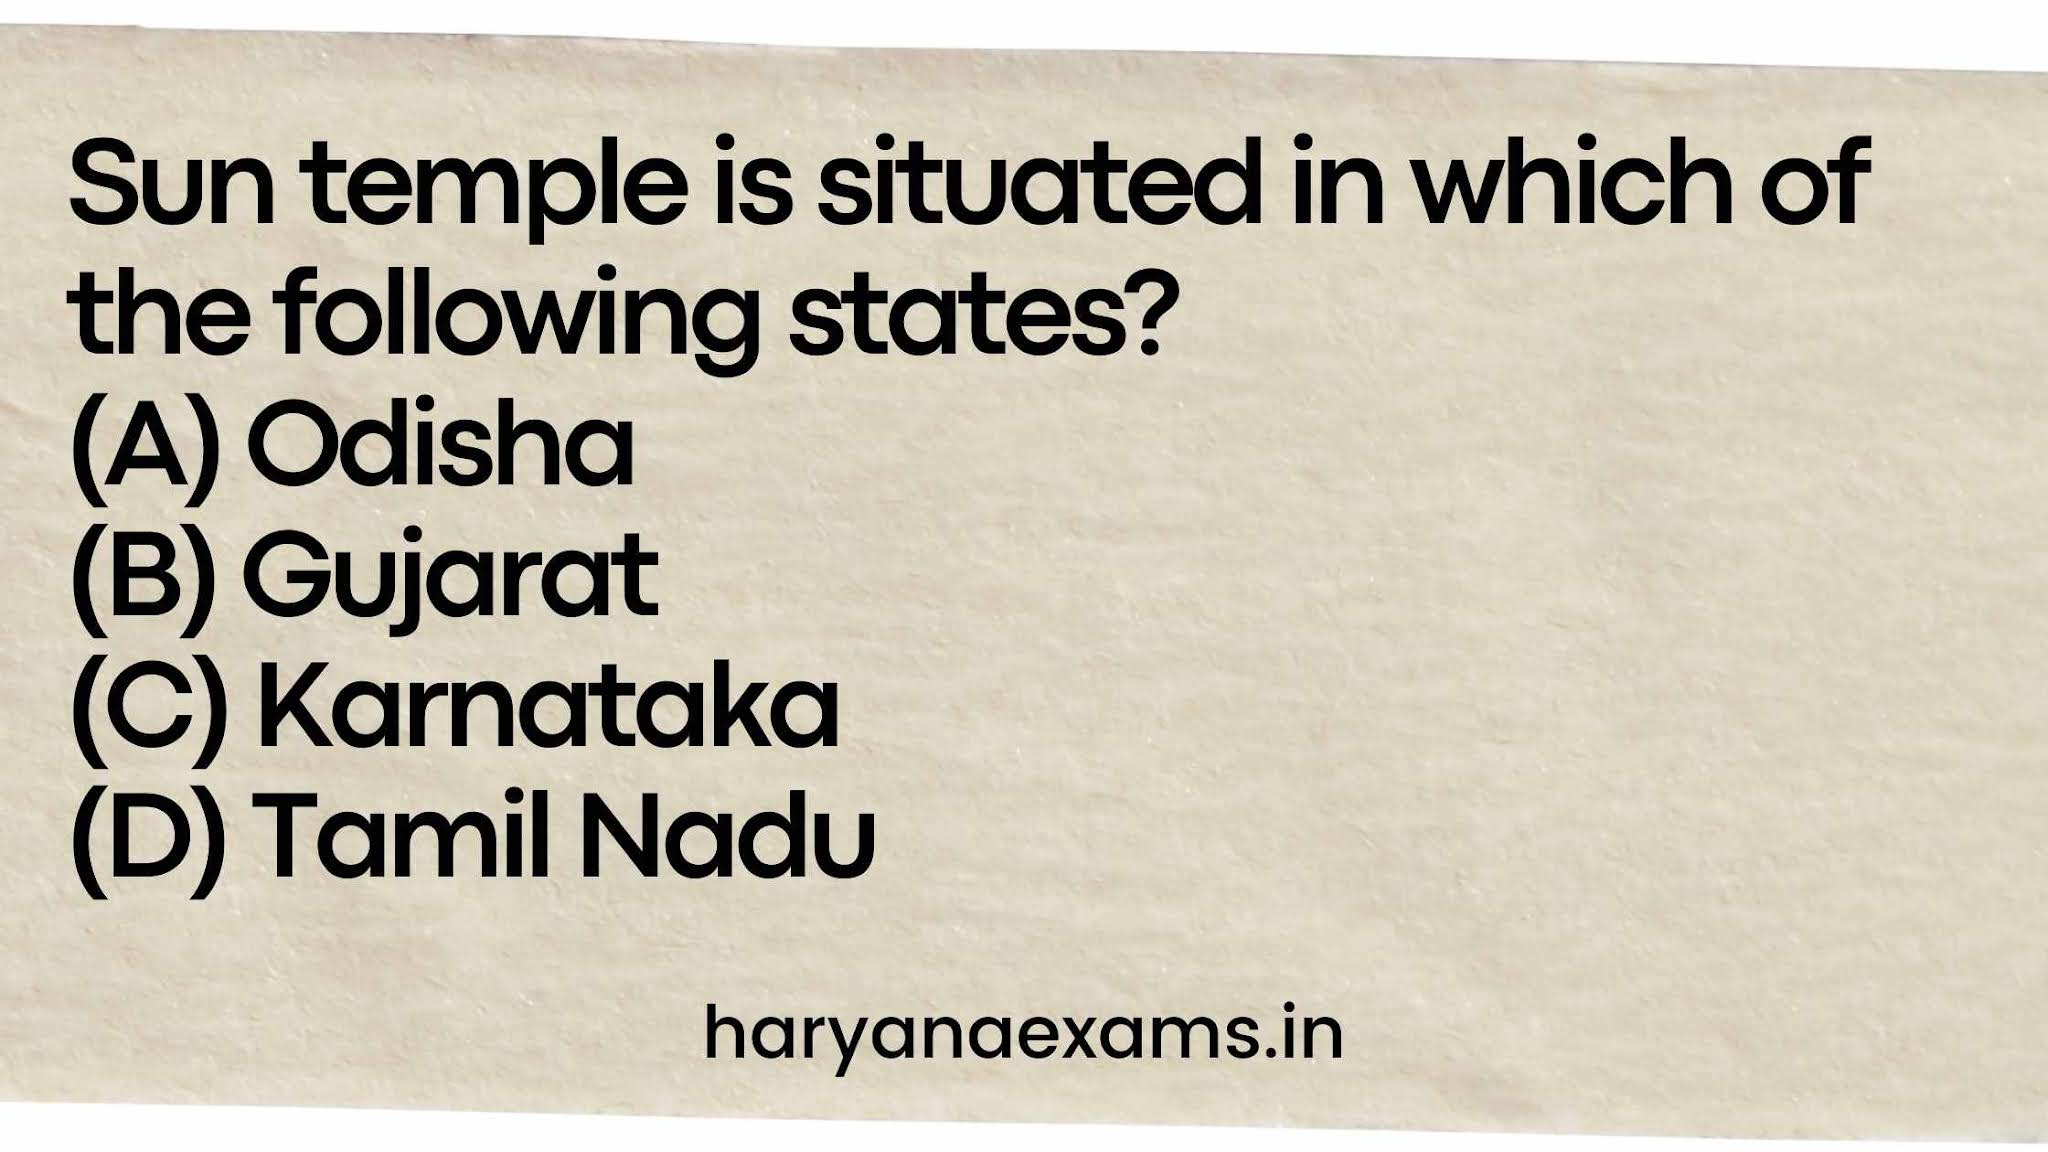 Sun temple is situated in which of the following states?   (A) Odisha   (B) Gujarat   (C) Karnataka   (D) Tamil Nadu